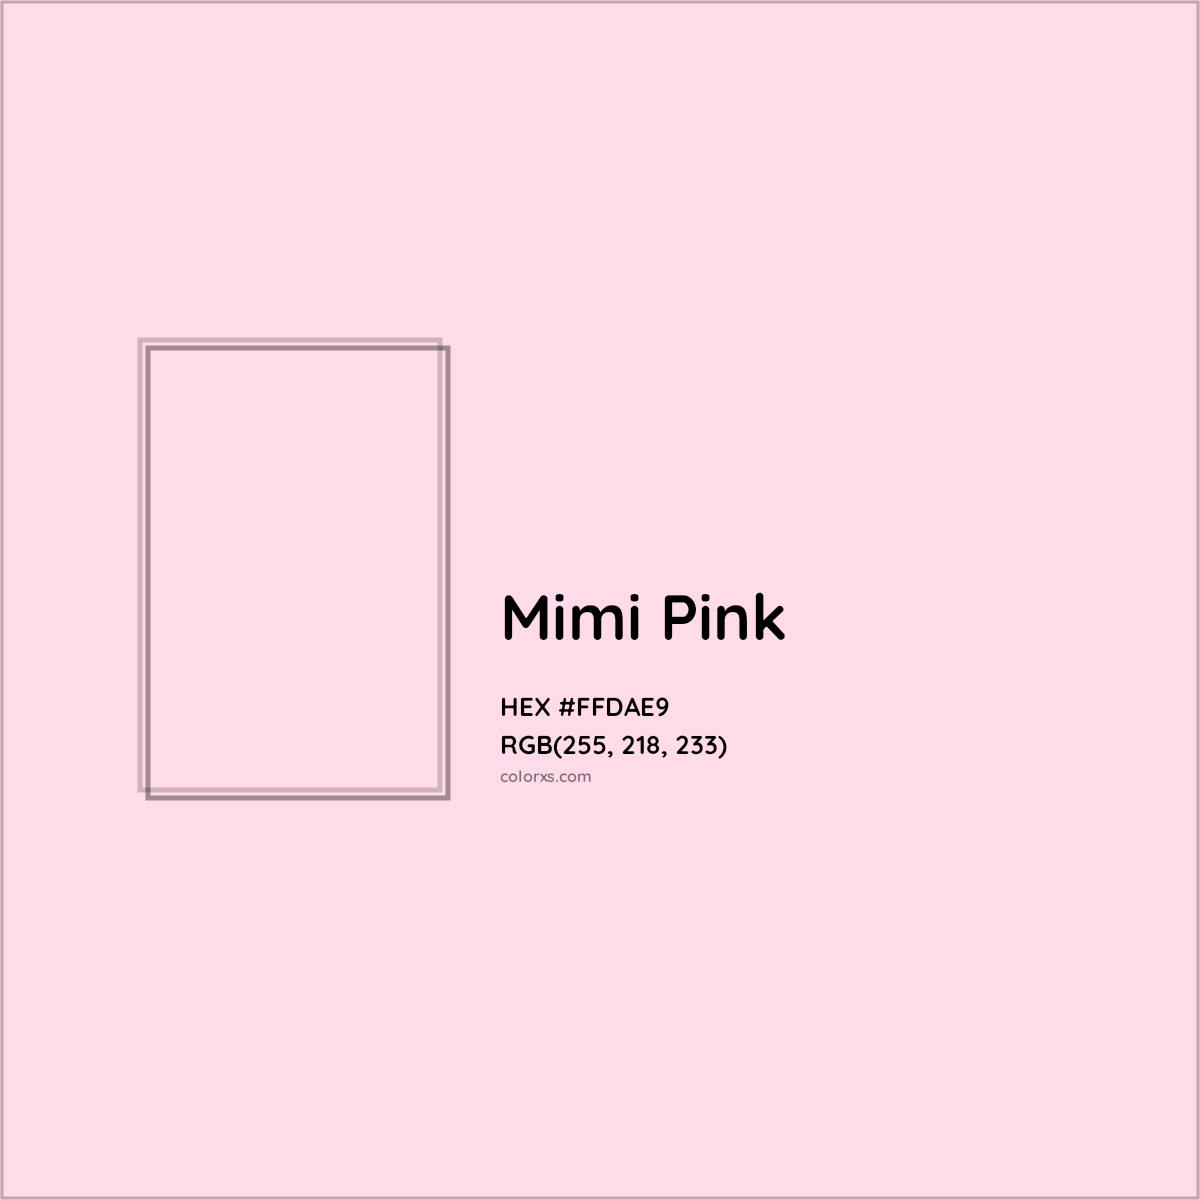 HEX #FFDAE9 Mimi Pink Color - Color Code